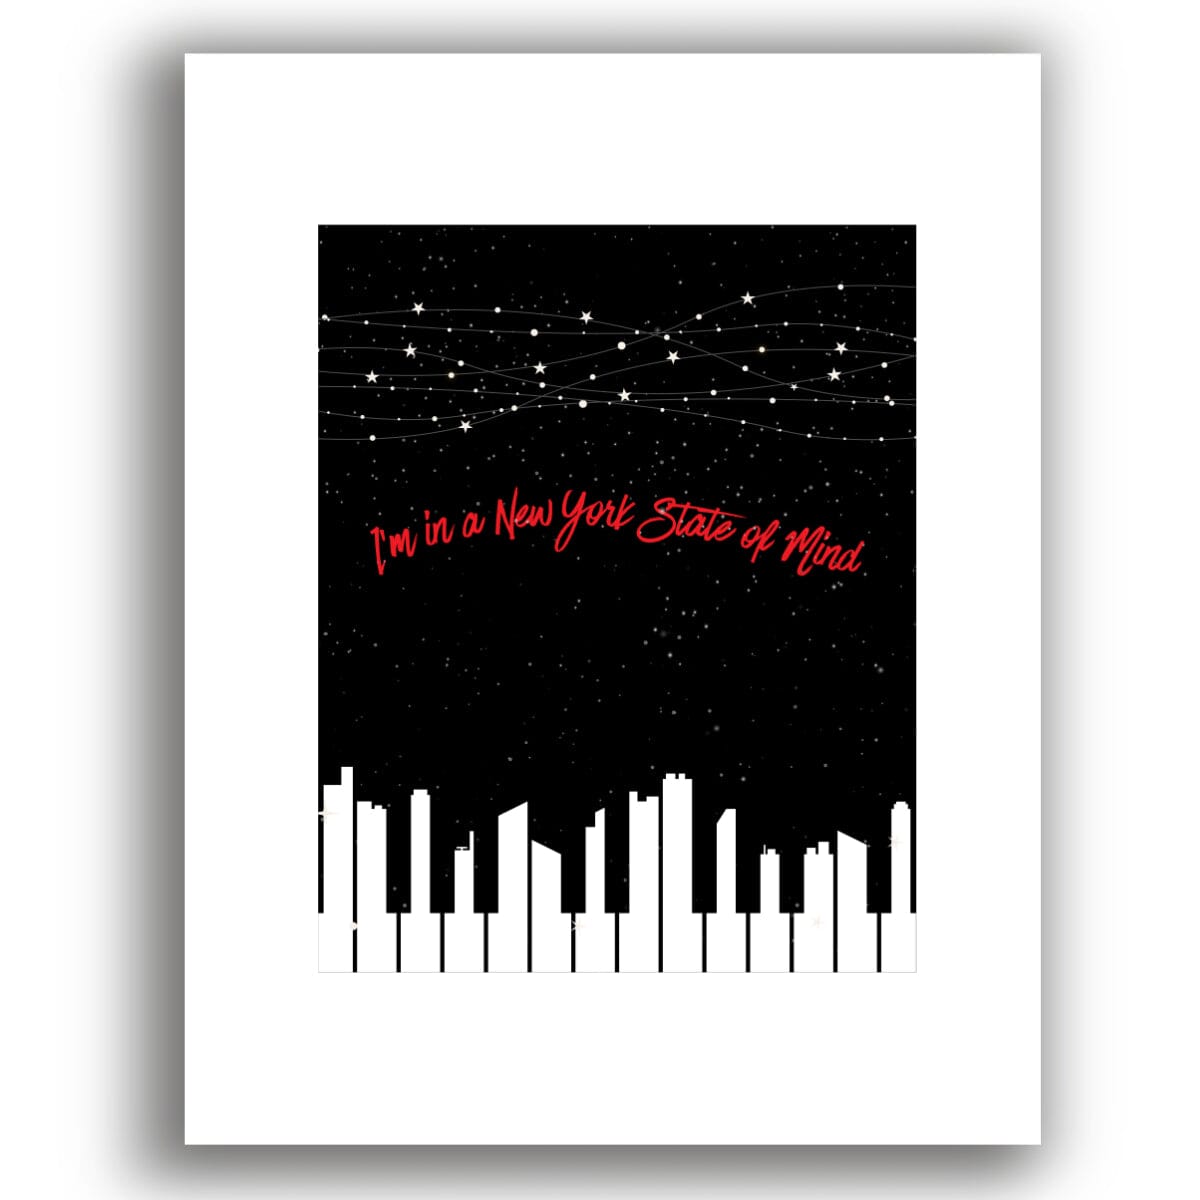 New York State of Mind by Billy Joel - Song Lyrics Art Print Song Lyrics Art Song Lyrics Art 8x10 White Matted Print 